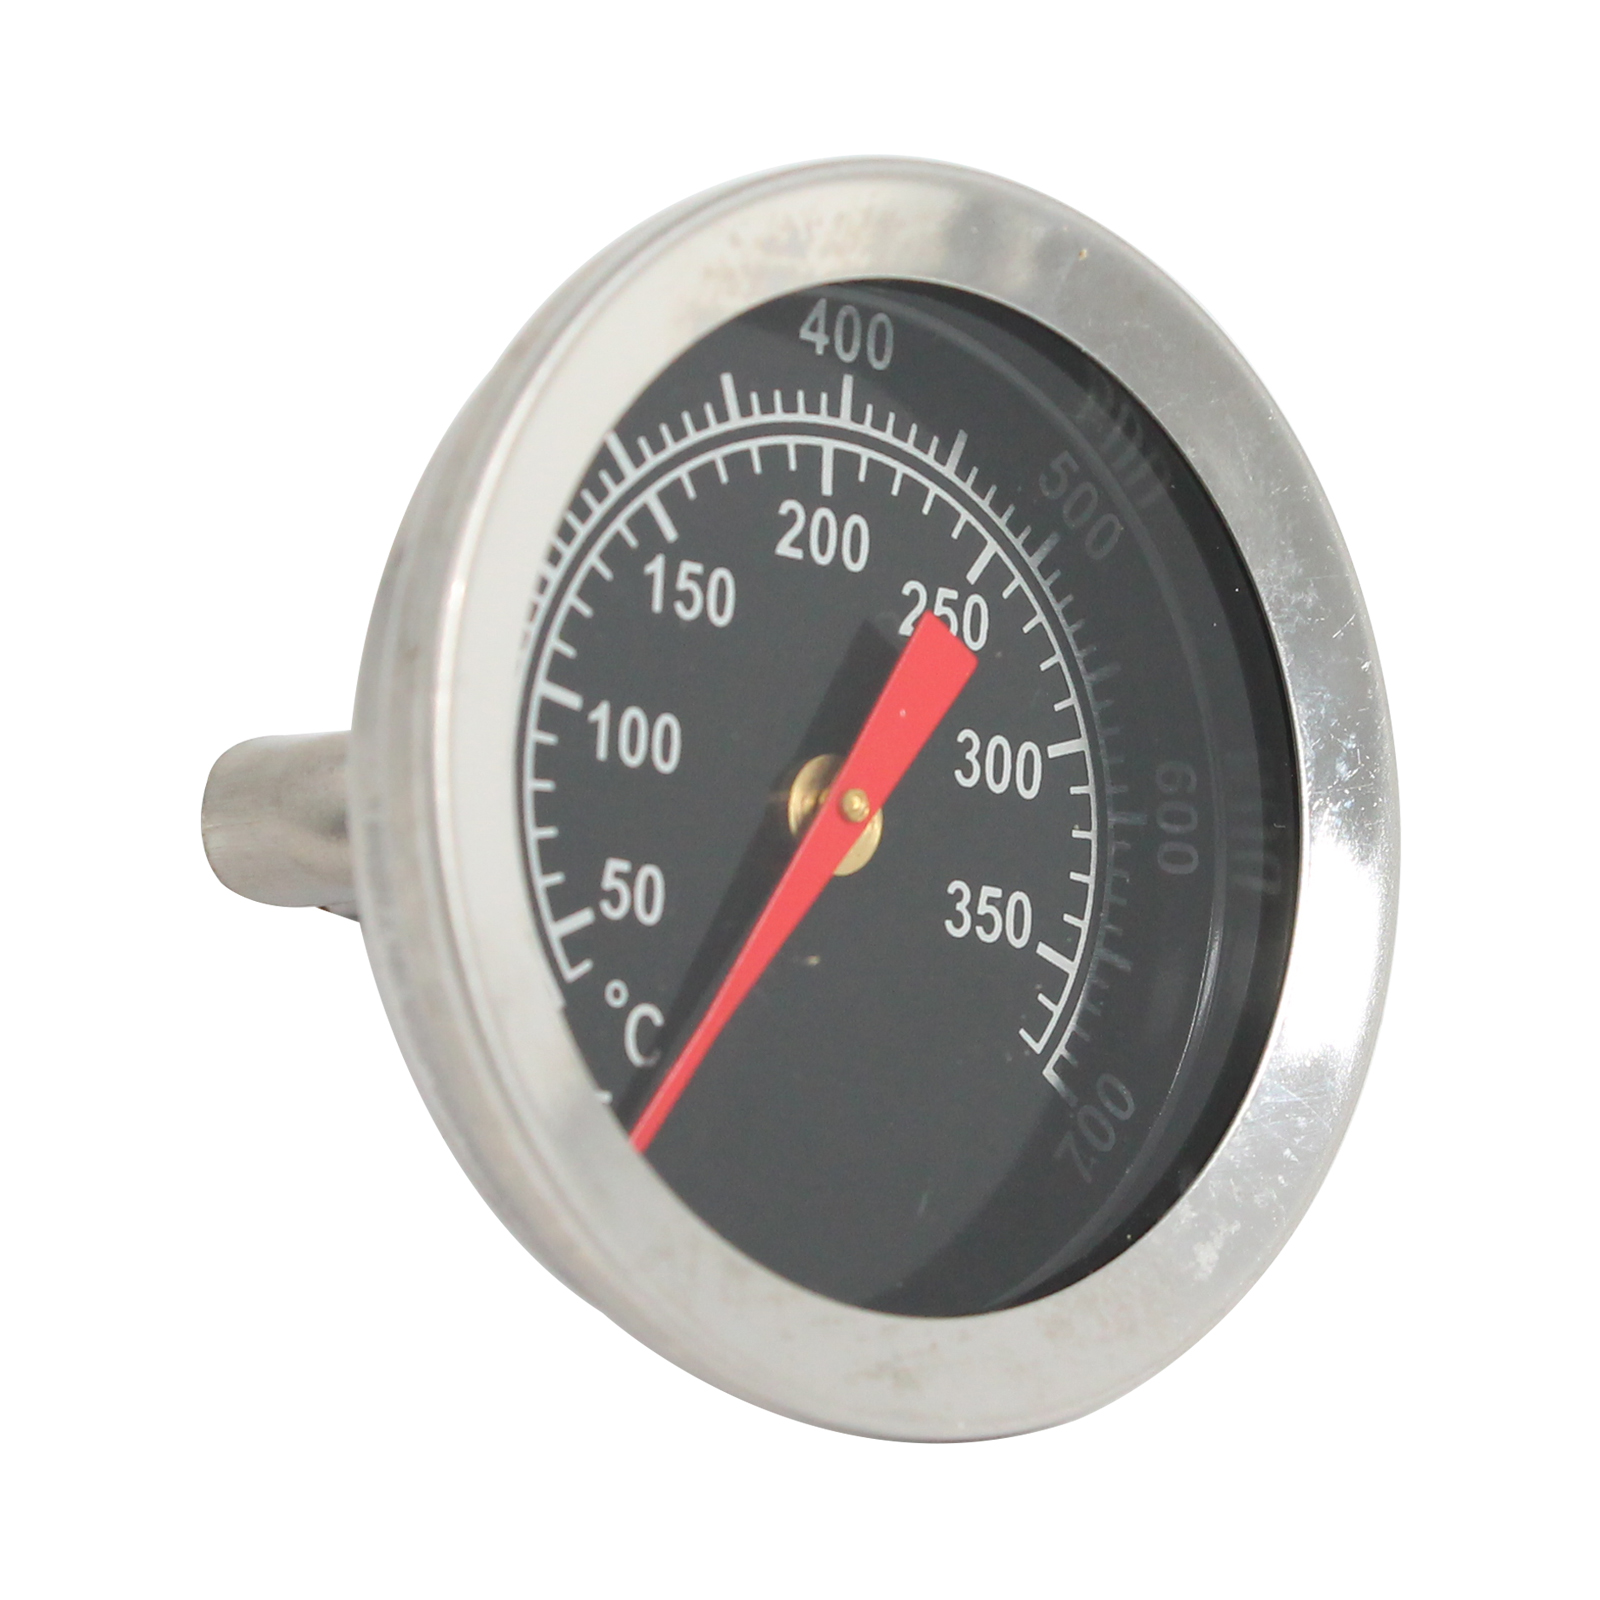 BBQ Grill Thermometer Heat Indicator Replacement Parts for Jenn Air 720-0163 - Compatible Barbeque Temperature Gauge Thermostat - image 2 of 4